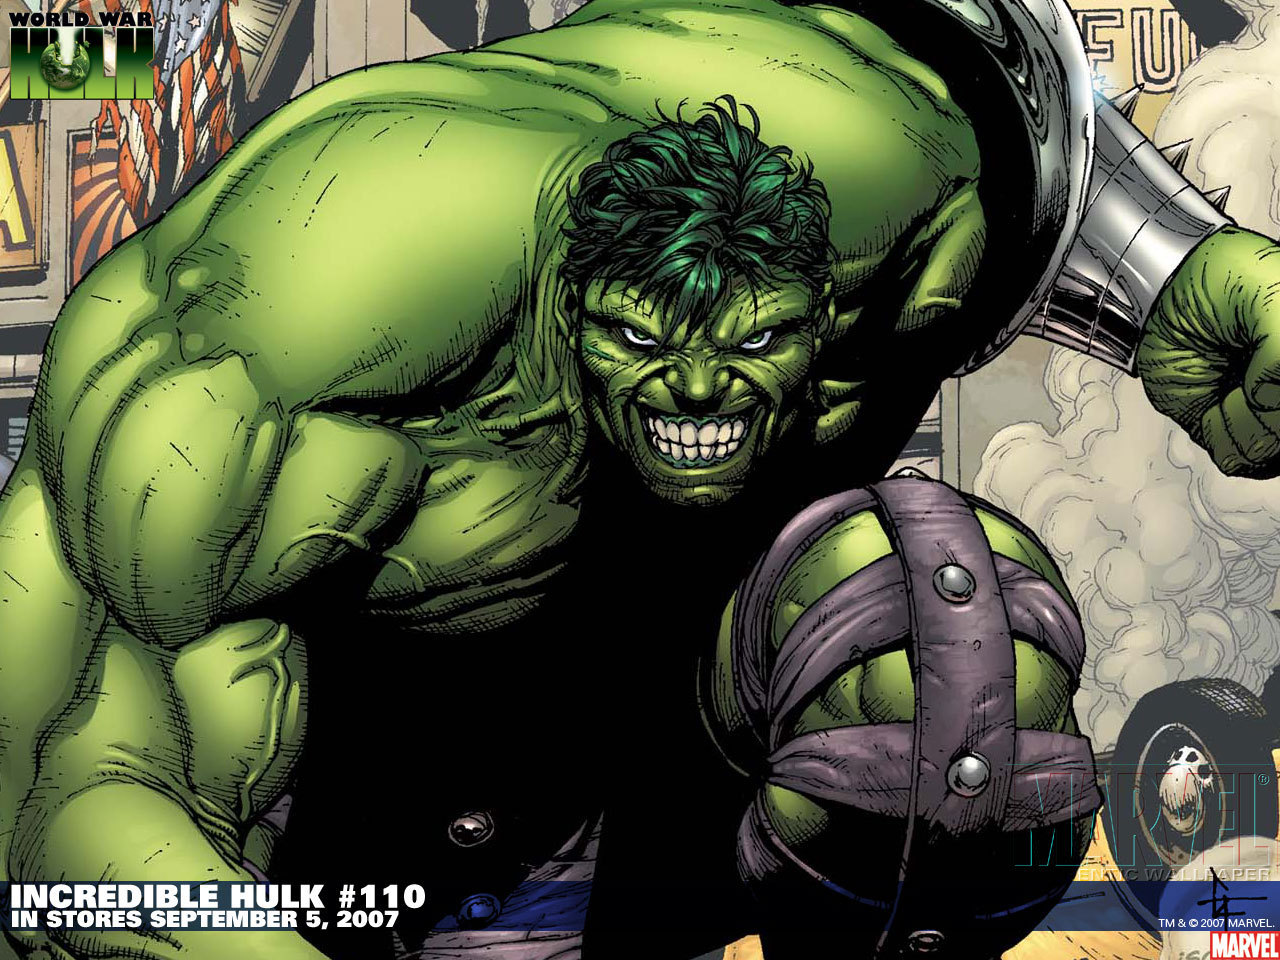 The Incredible Hulk Image HD Wallpaper And Background Photos